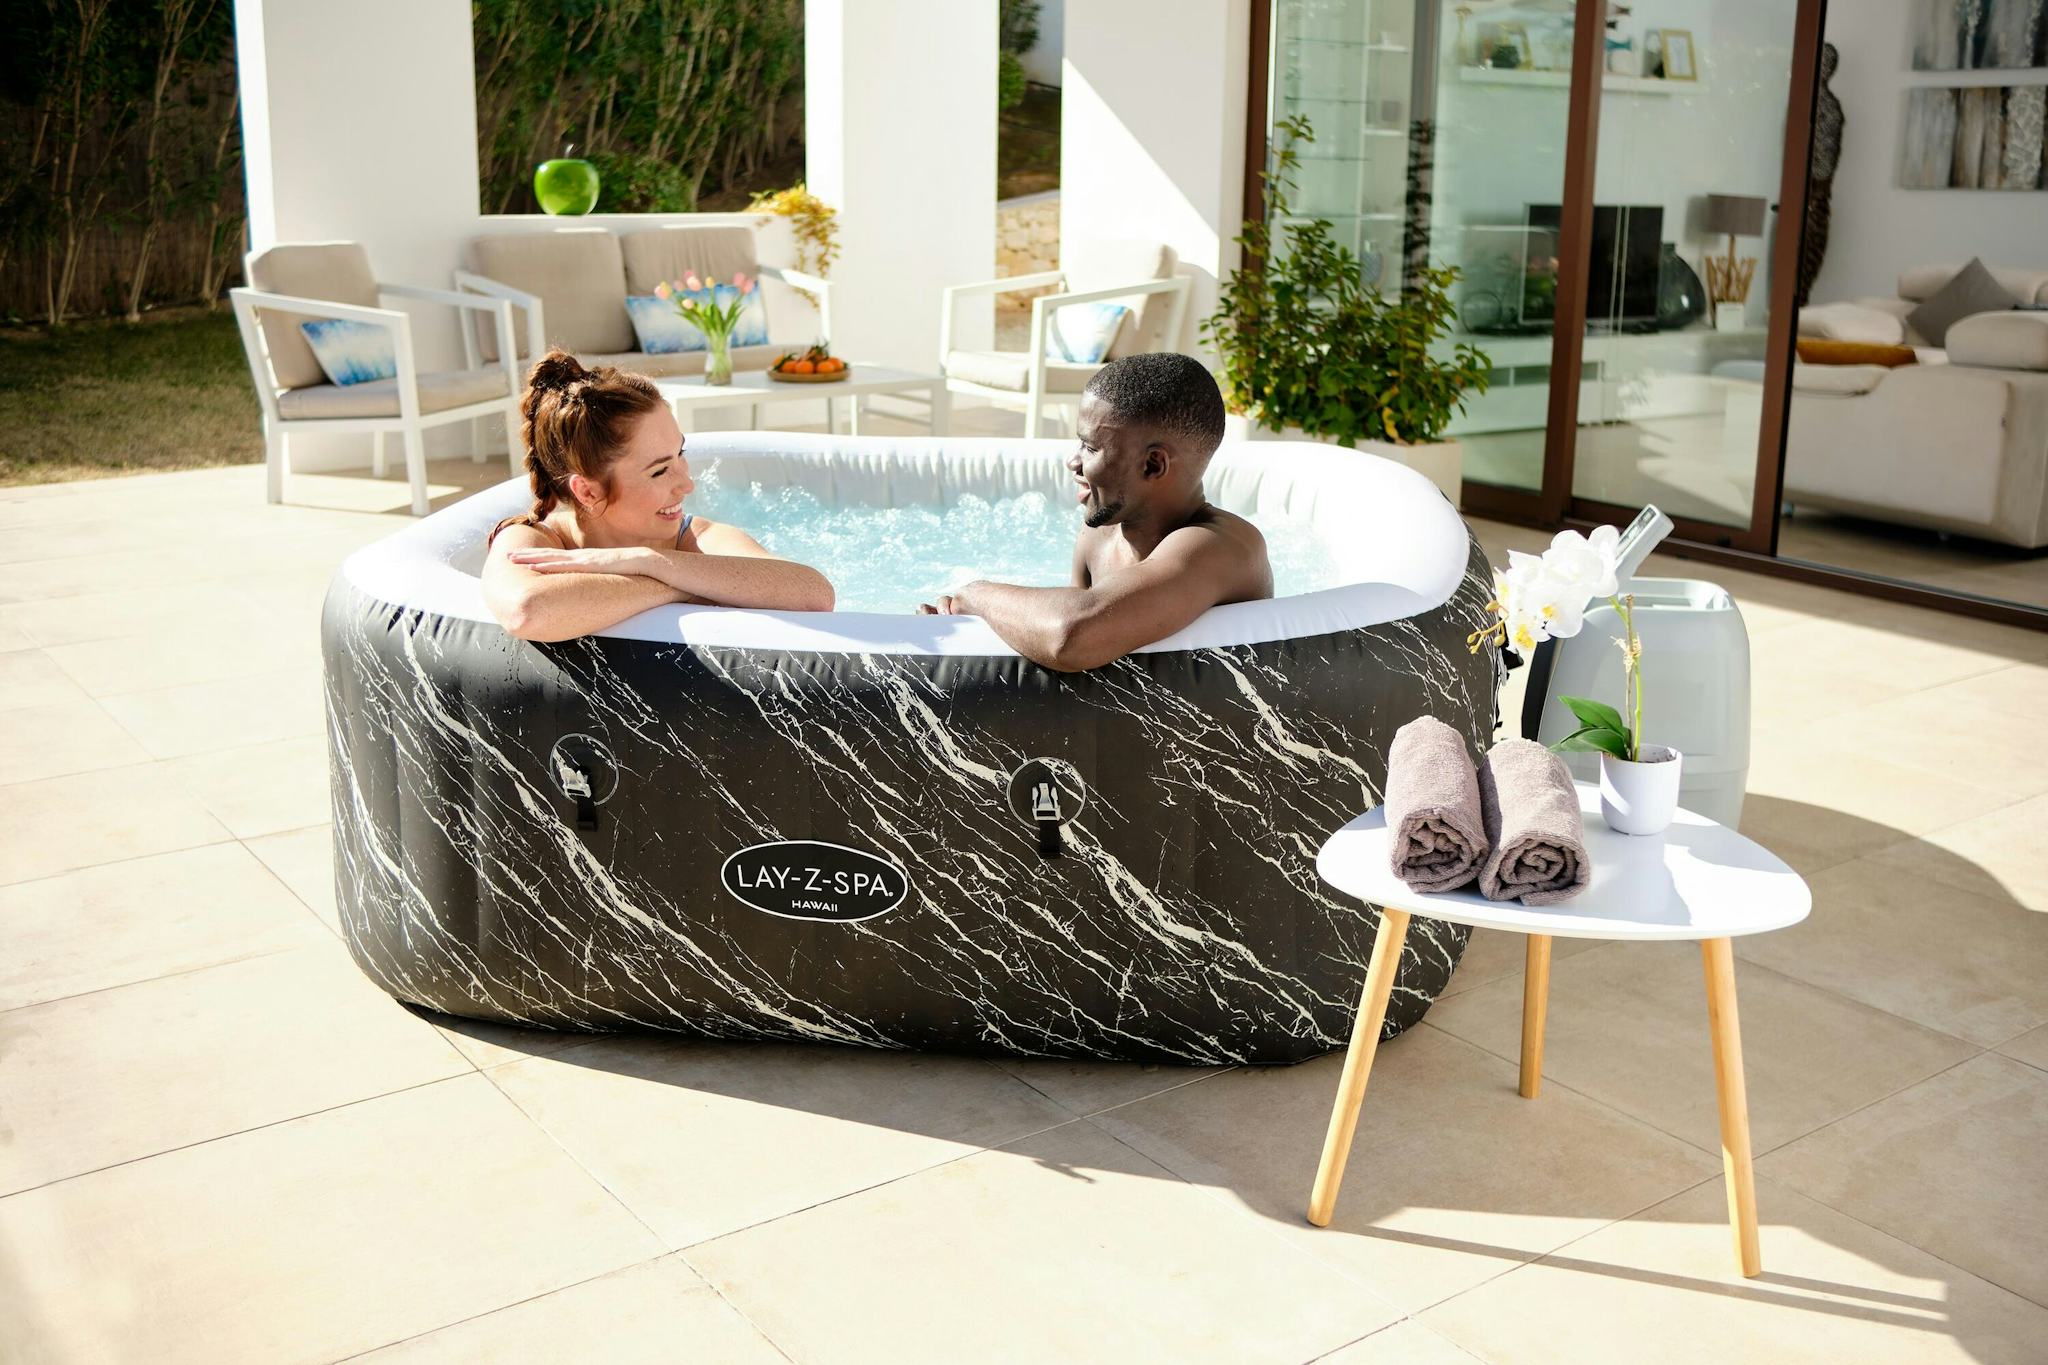 Spas Gonflables Spa gonflable carré Lay-Z-Spa Hawaii Smart Luxe Airjet™ 4 - 6 personnes Bestway 12